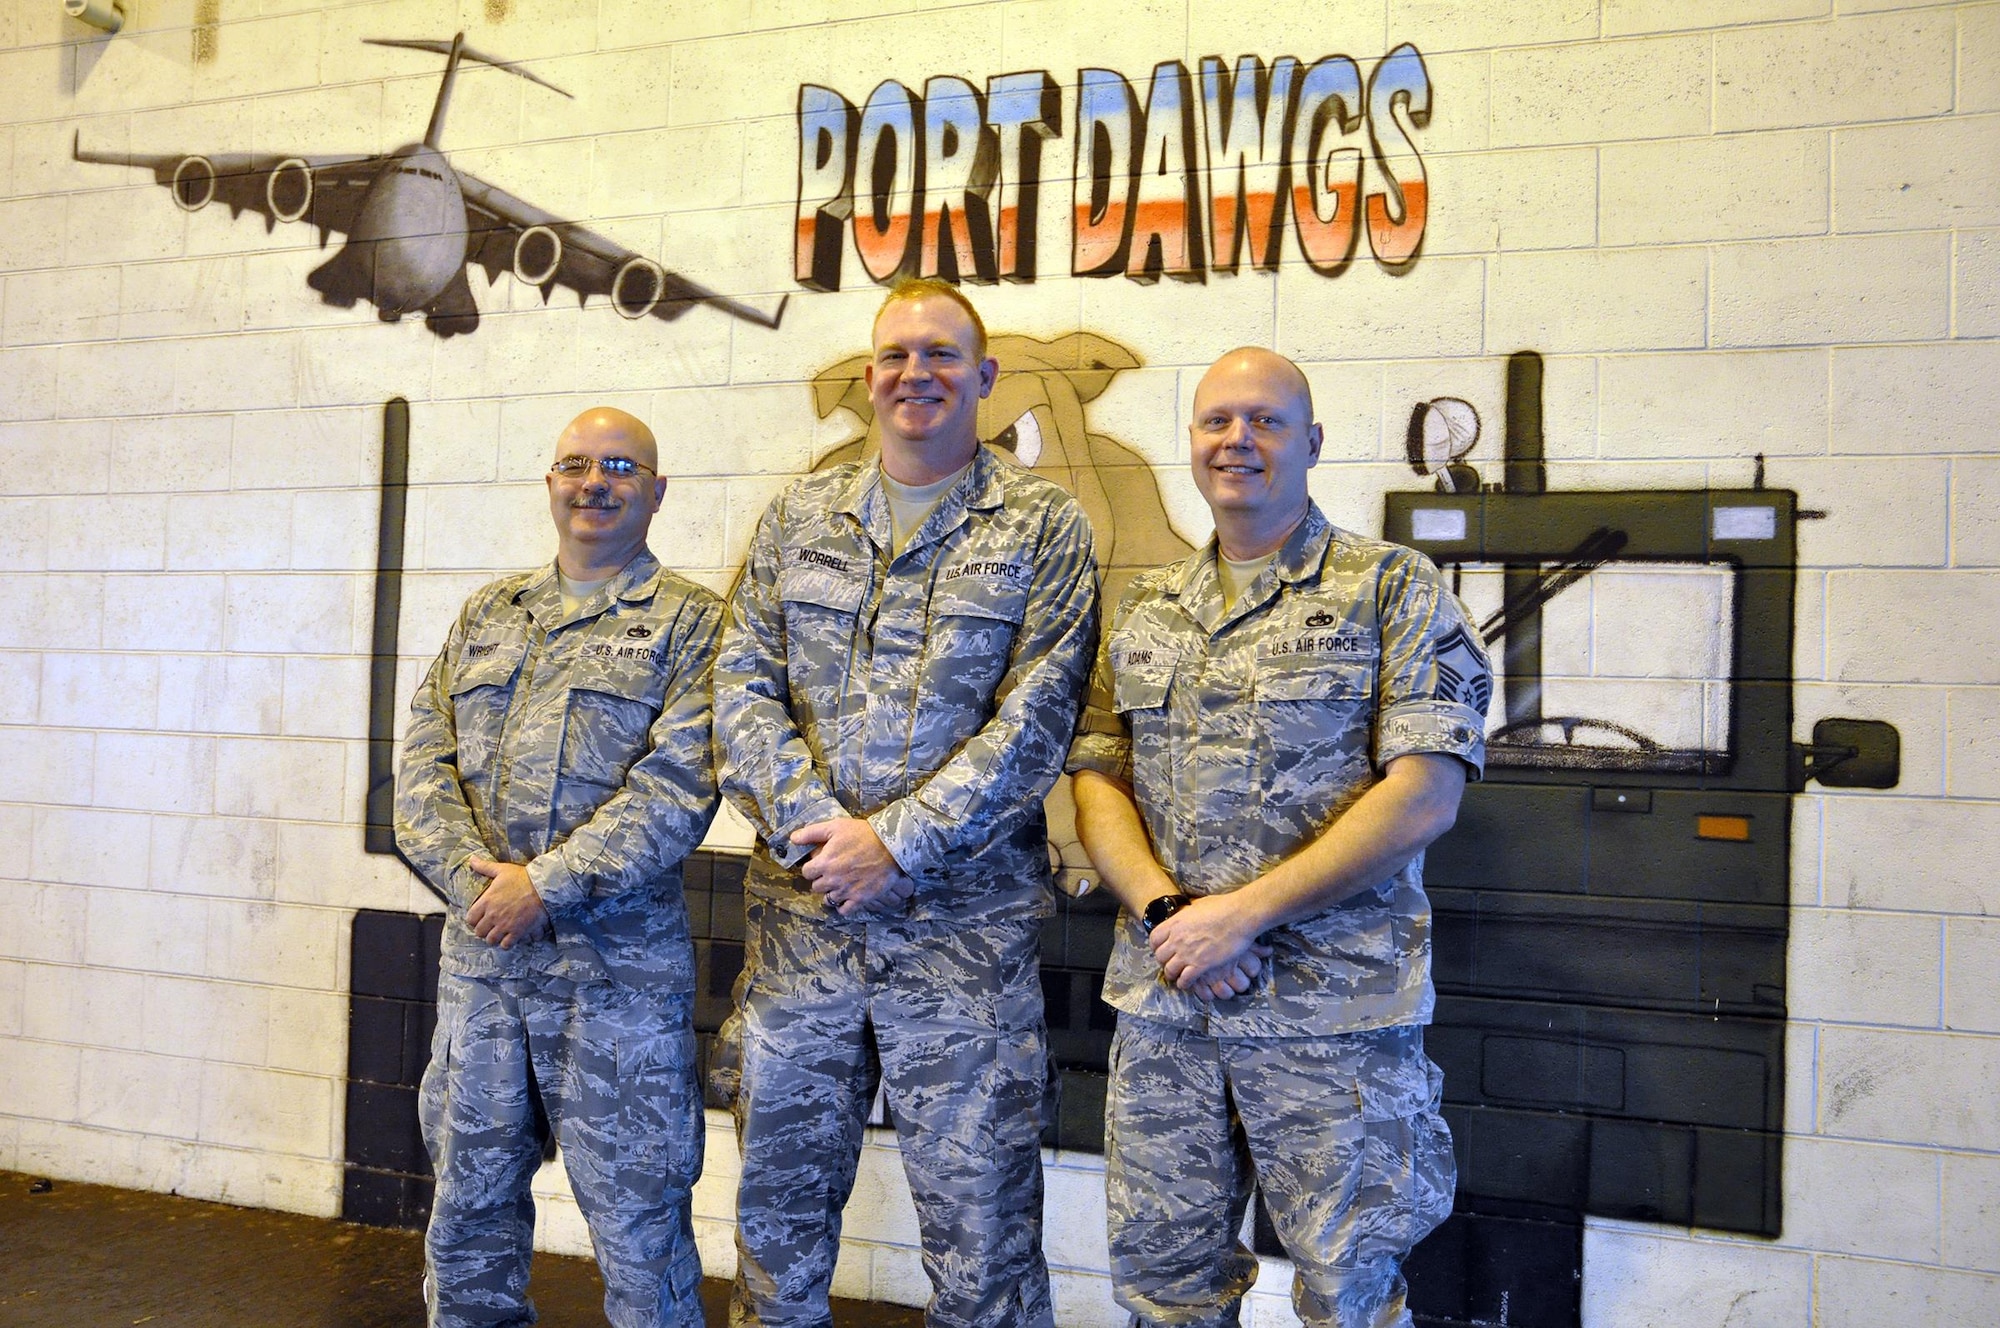 Senior Master Sgt. Paul Wright, Master Sgt. David Worrell and Senior Master Sgt. Steve Adams, all members of the 87th Aerial Port Squadron, have more than 50 years of service at the 445th Airlift Wing. These Airmen are retiring this year. (U.S. Air Force photo/Staff Sgt. Rachel Ingram)